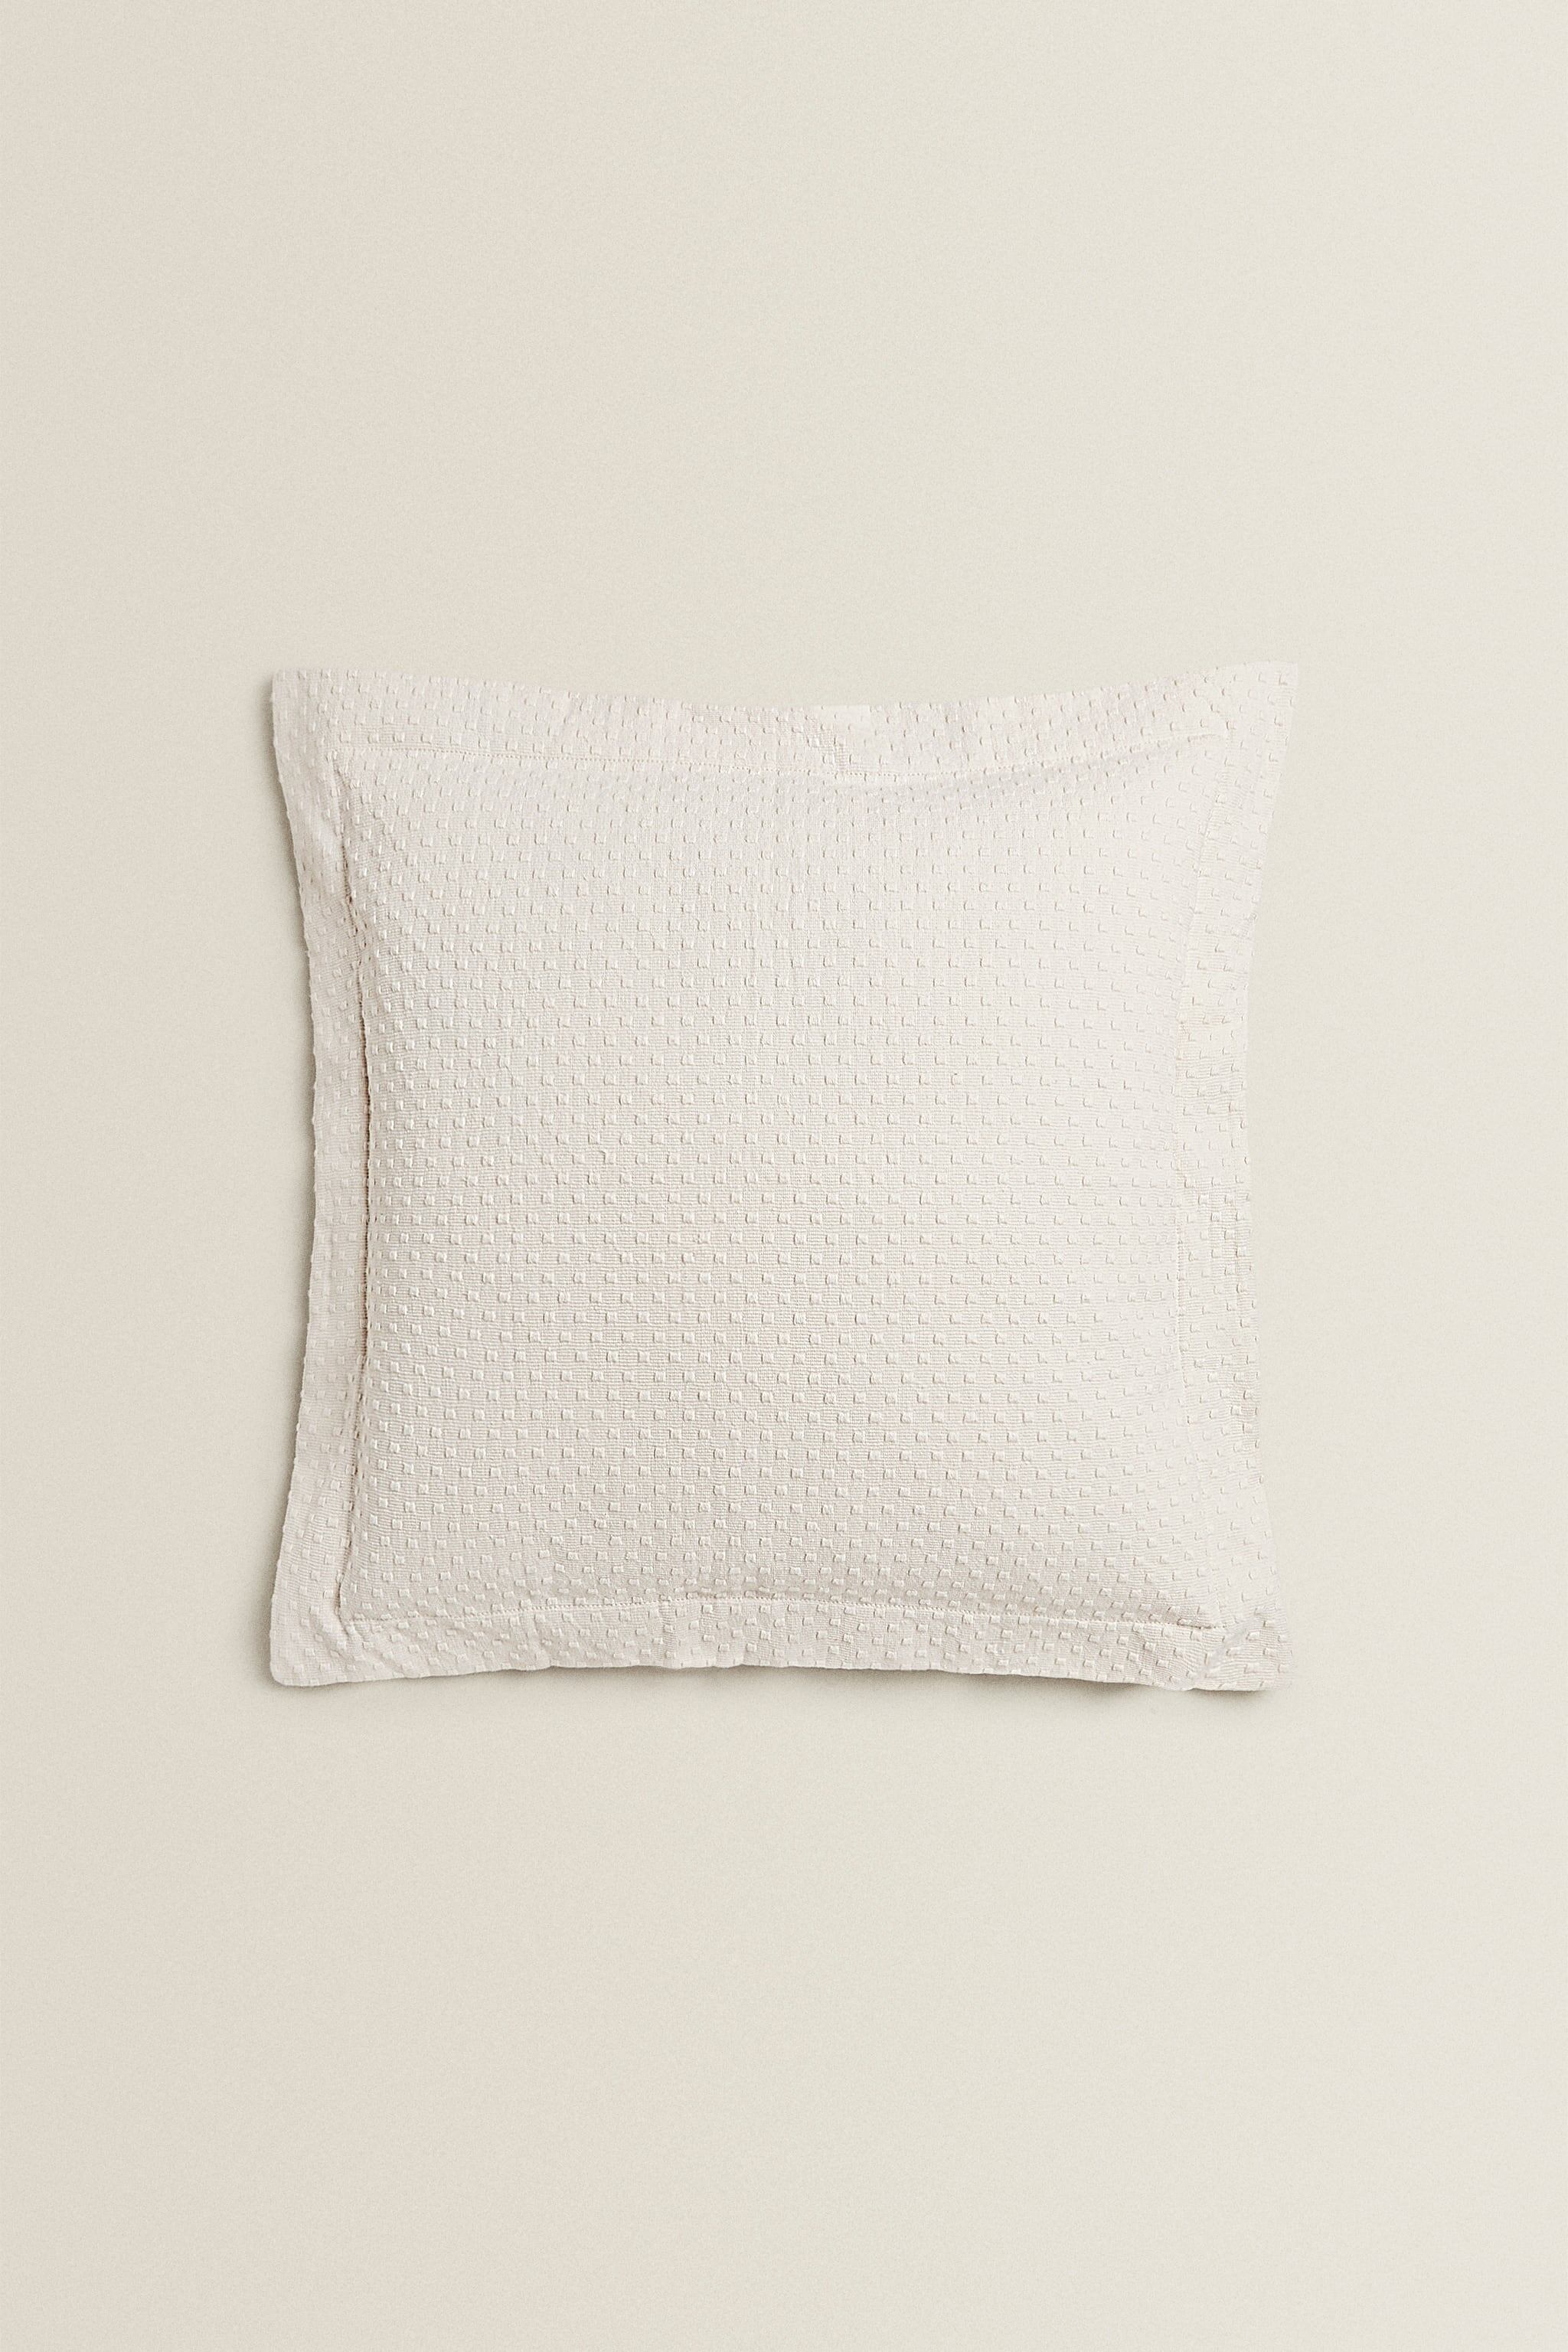 THROW PILLOW COVER WITH POLKA DOT DESIGN